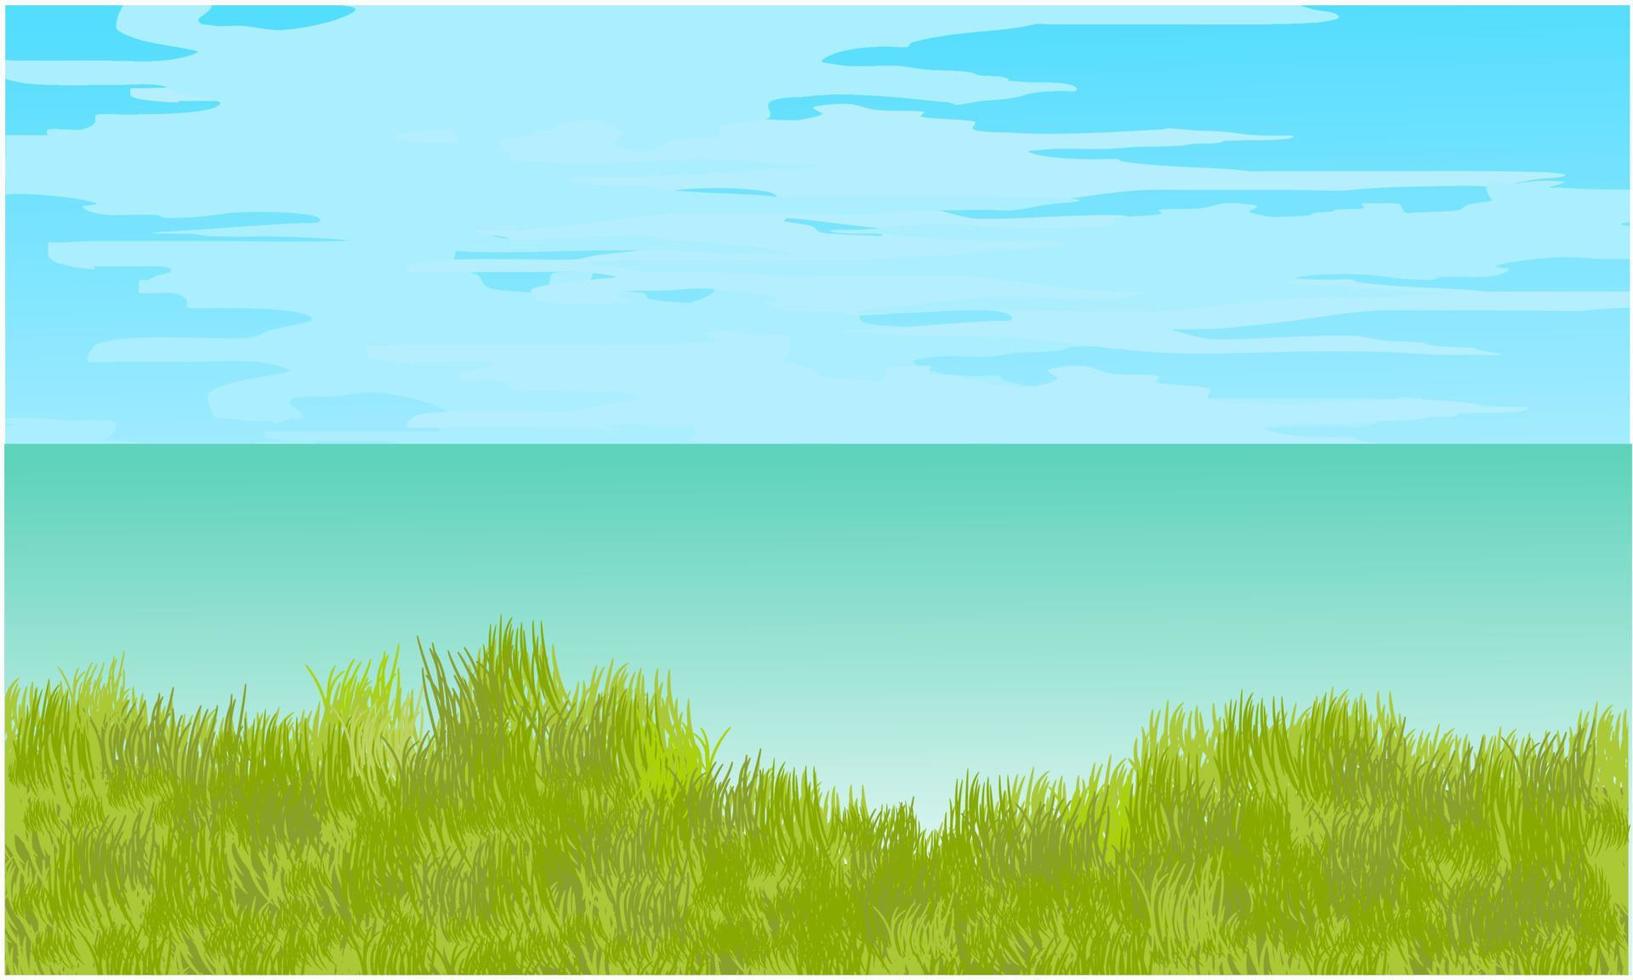 grass beach with blue sky background, beach view with green grass vector